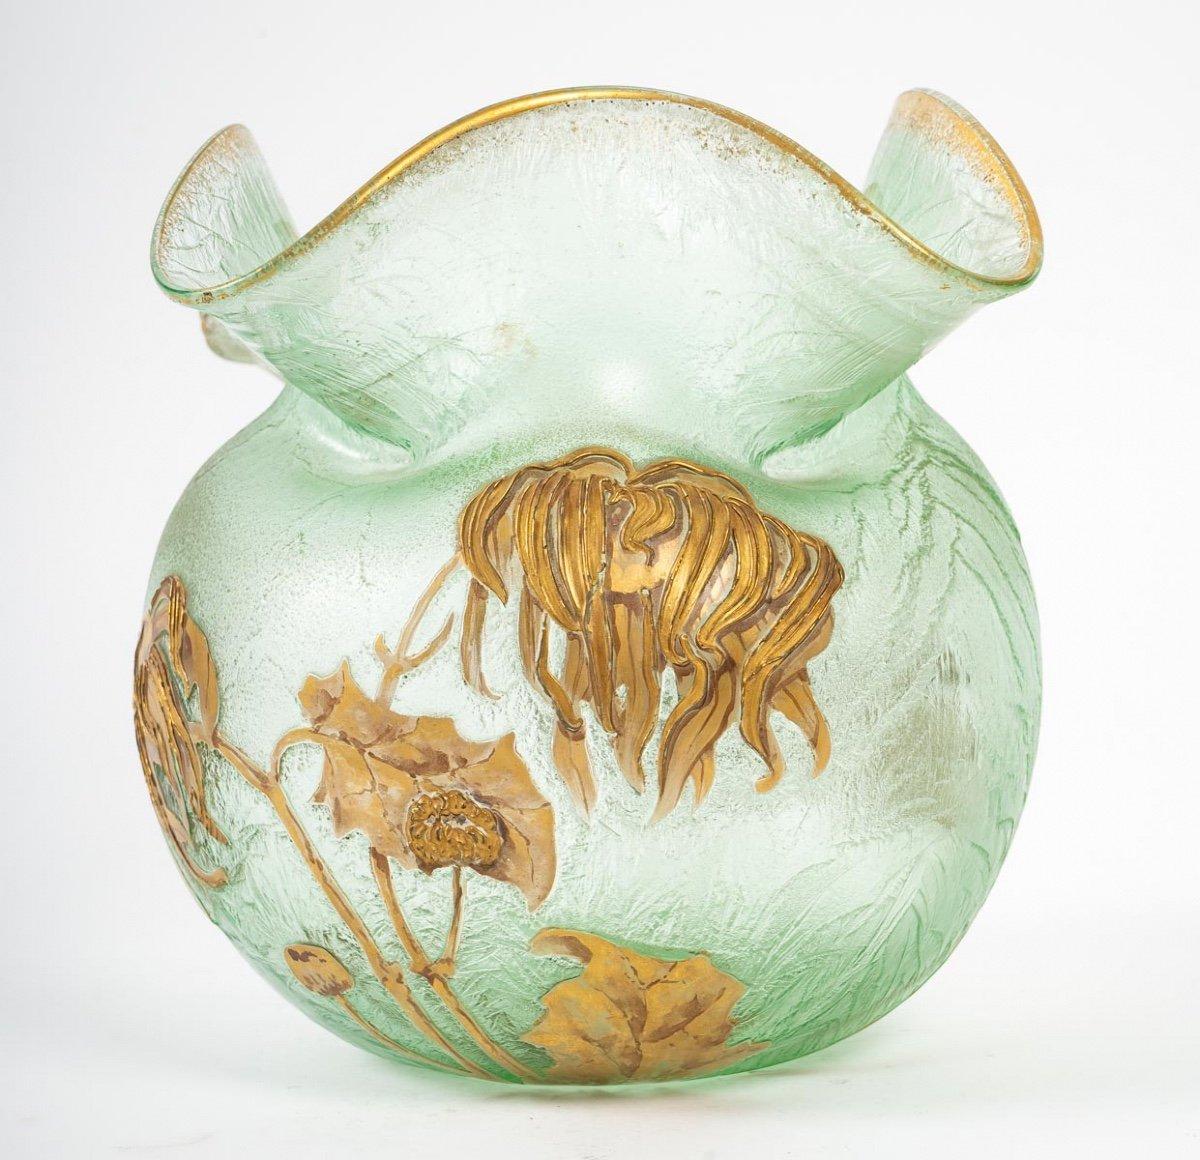 Magnificent acid-frosted globular vase, with hemmed neck, bordered with gold powder.
Gold highlights and enamelled poppy flowers testify to the unique style and elegance of the creations proposed by François Théodore Legras.

Period: 1900 – Art